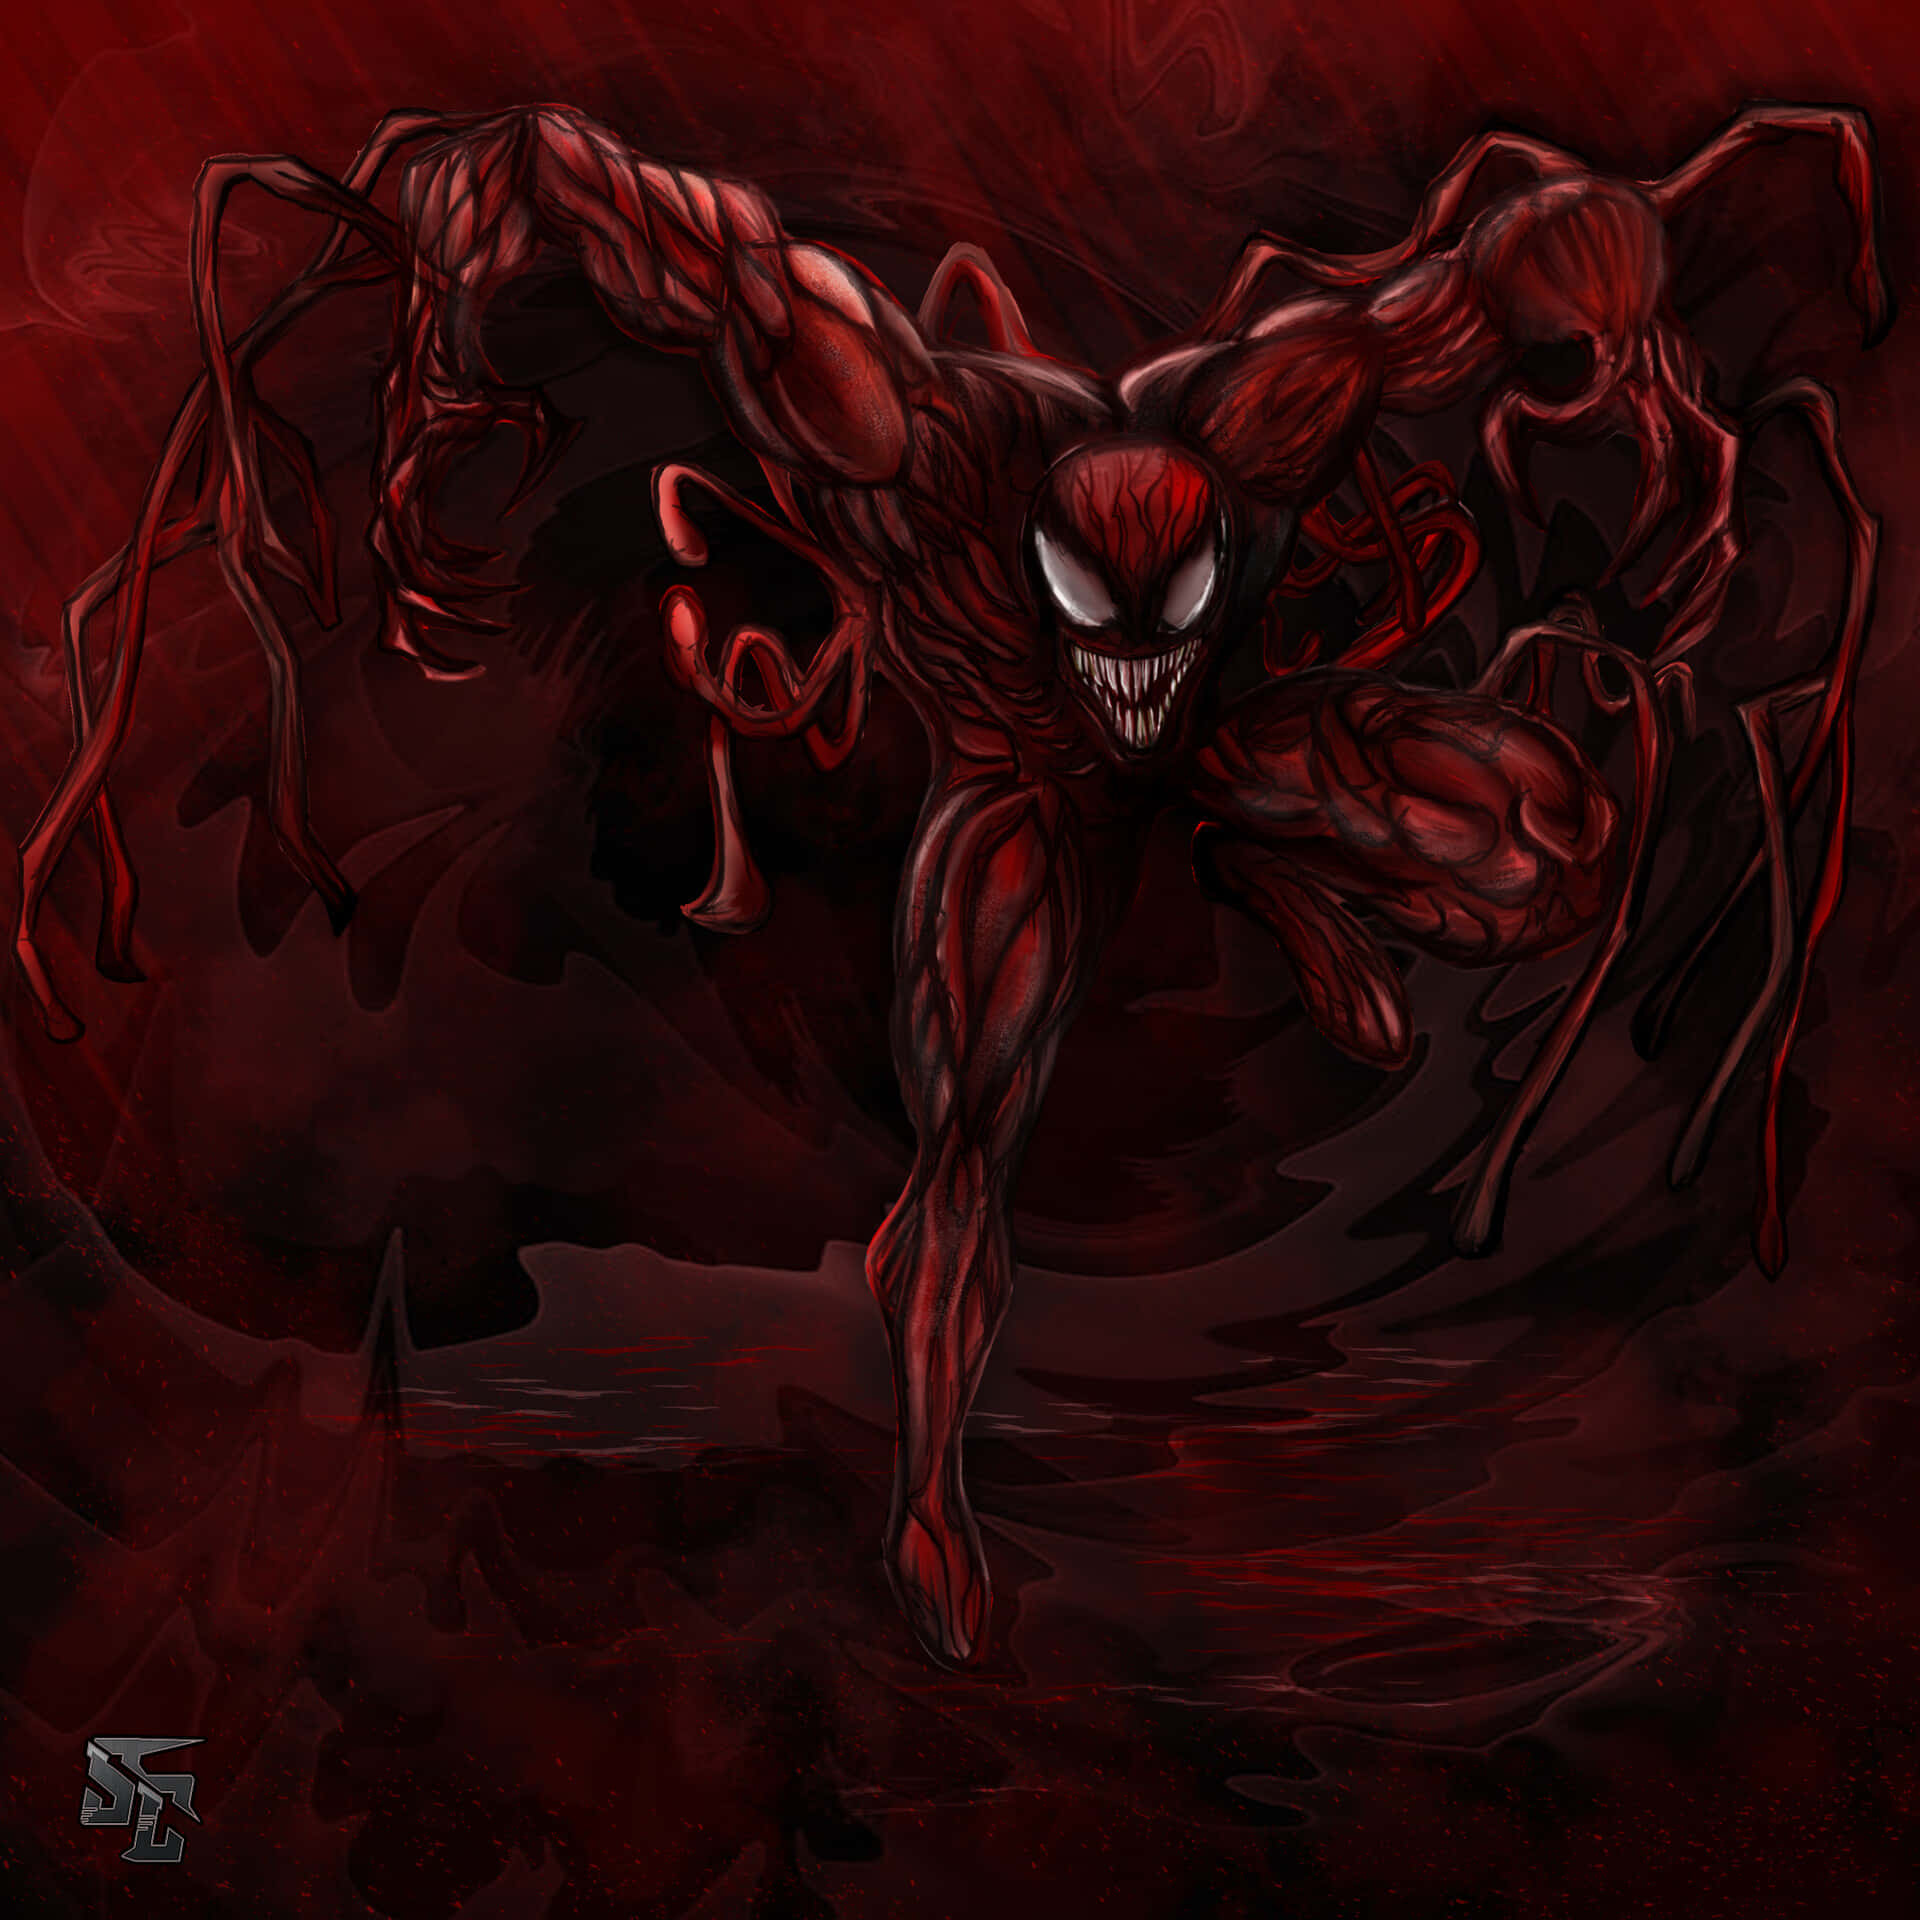 Venom and Spiderman Face-off in Maximum Carnage Wallpaper